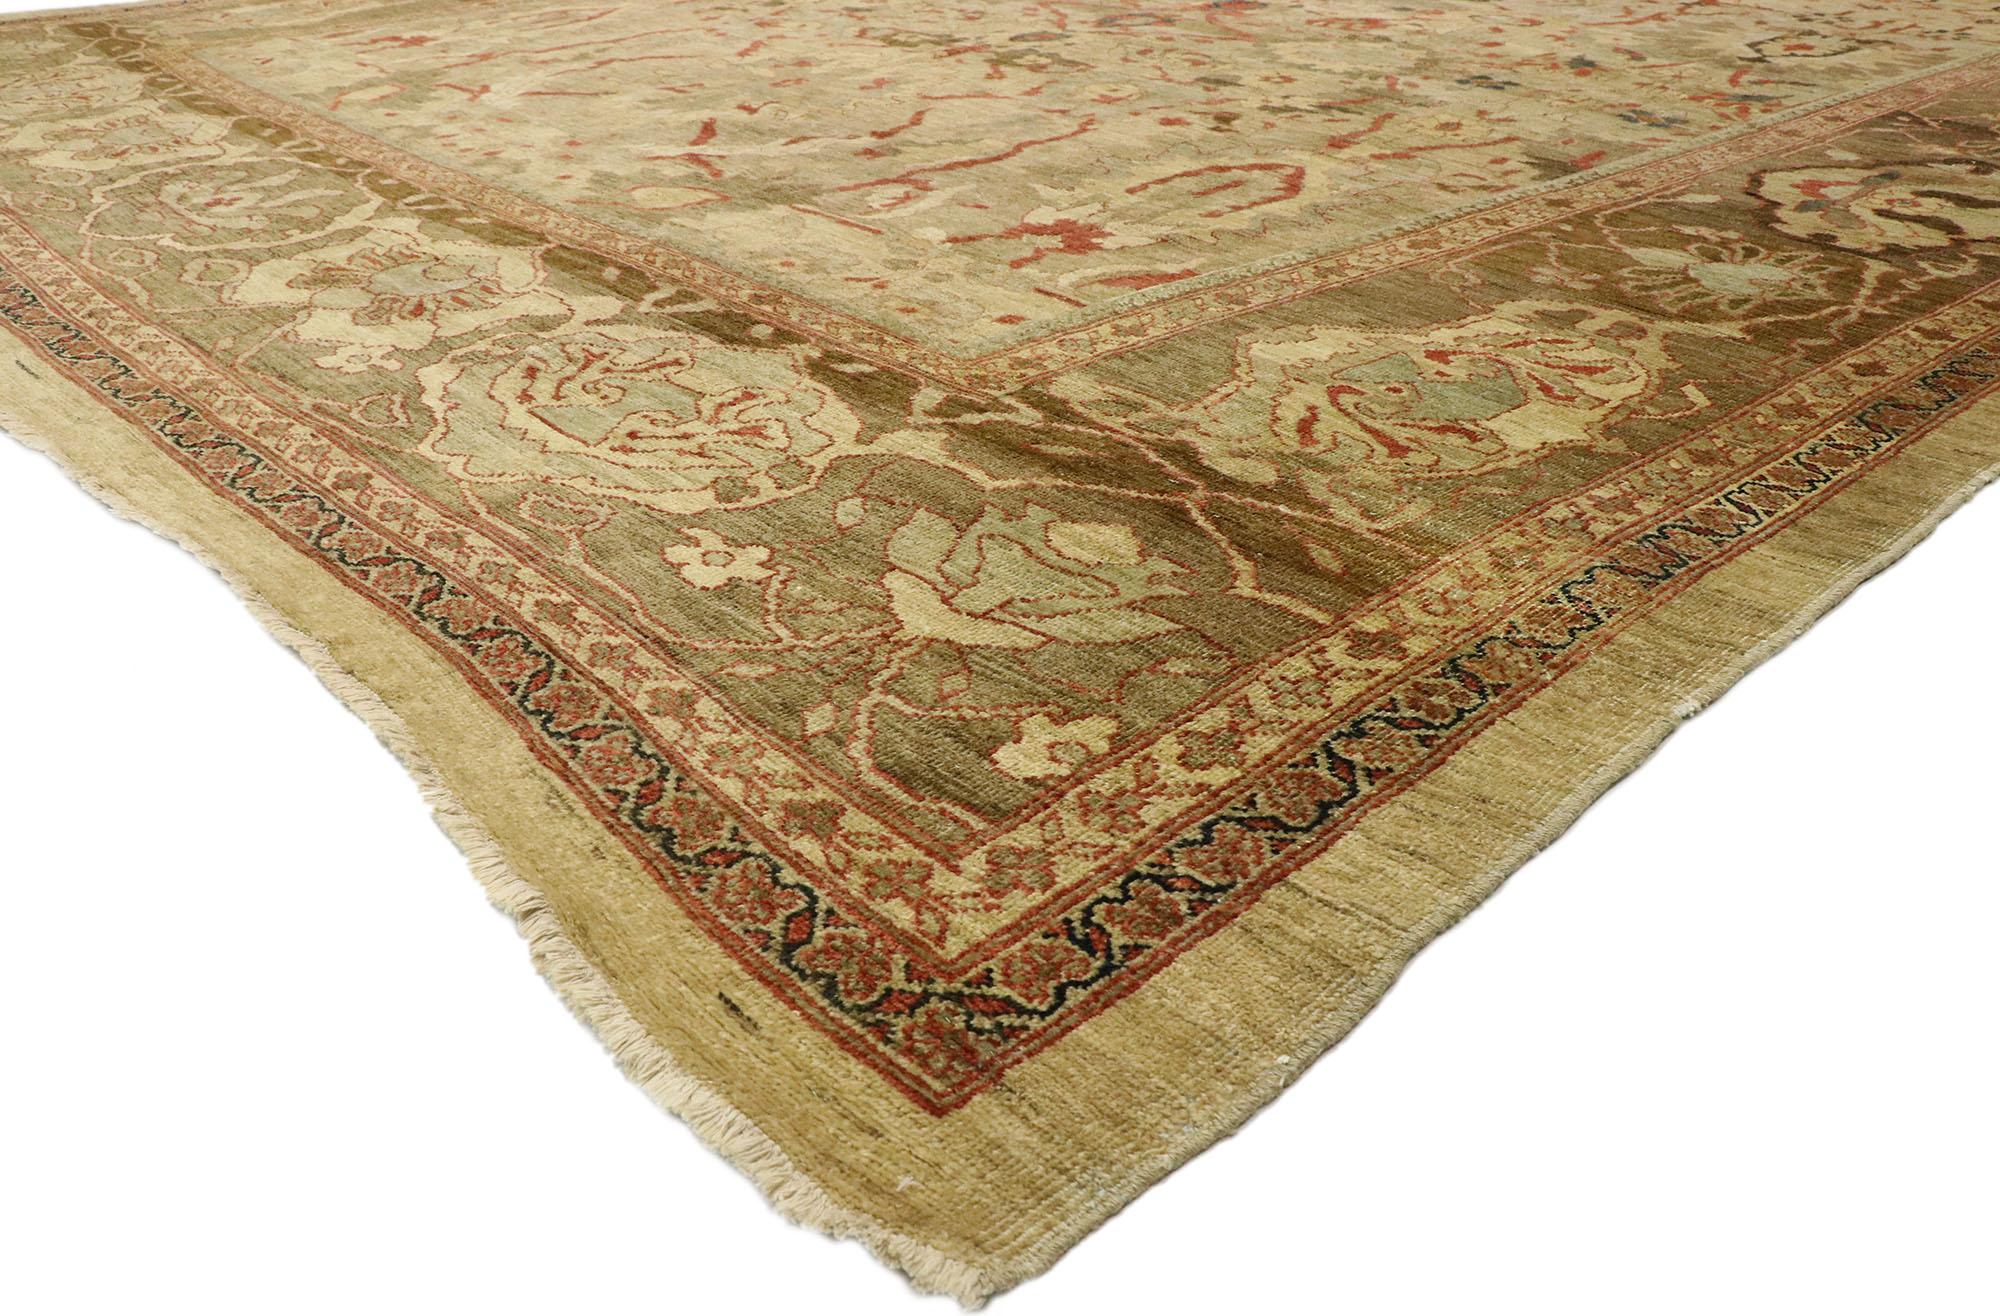 77507 Vintage Persian Sultanabad Rug, 13'02 x 17'05. Exuding a serene elegance rooted in Biophilic Design, this vintage hand-knotted wool Persian Sultanabad palatial rug epitomizes relaxed refinement with its ornate details and well-balanced